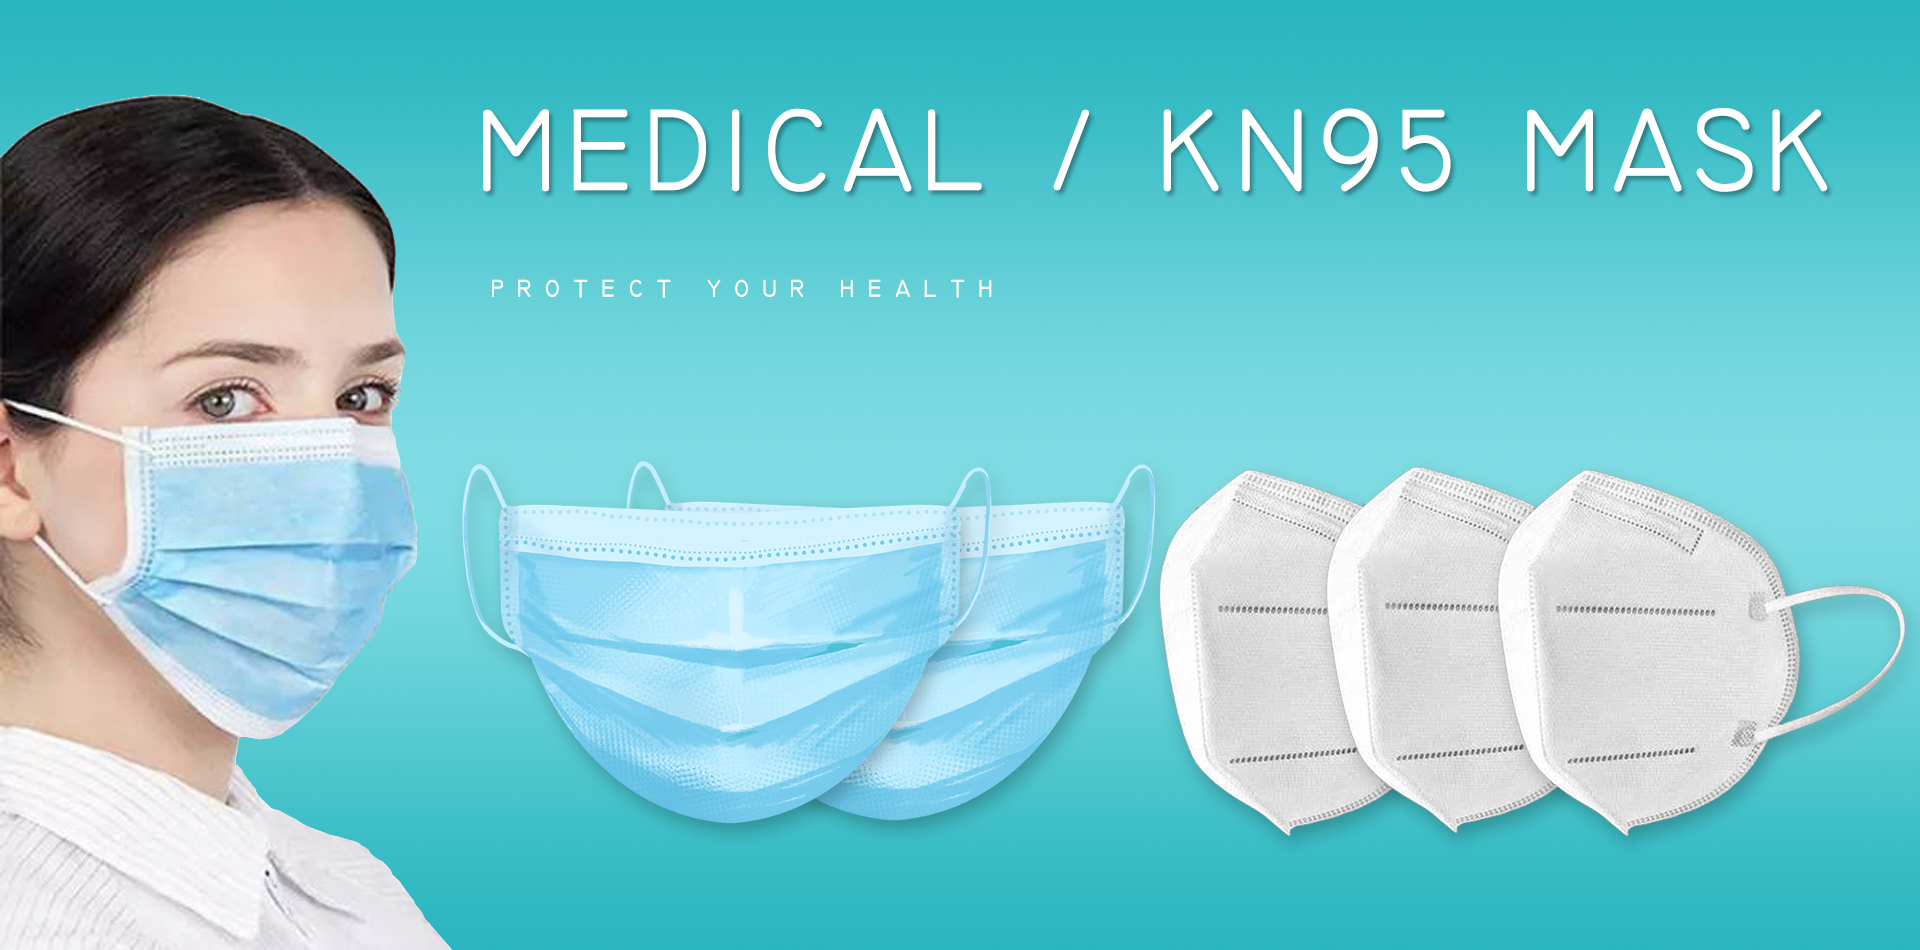 medical products